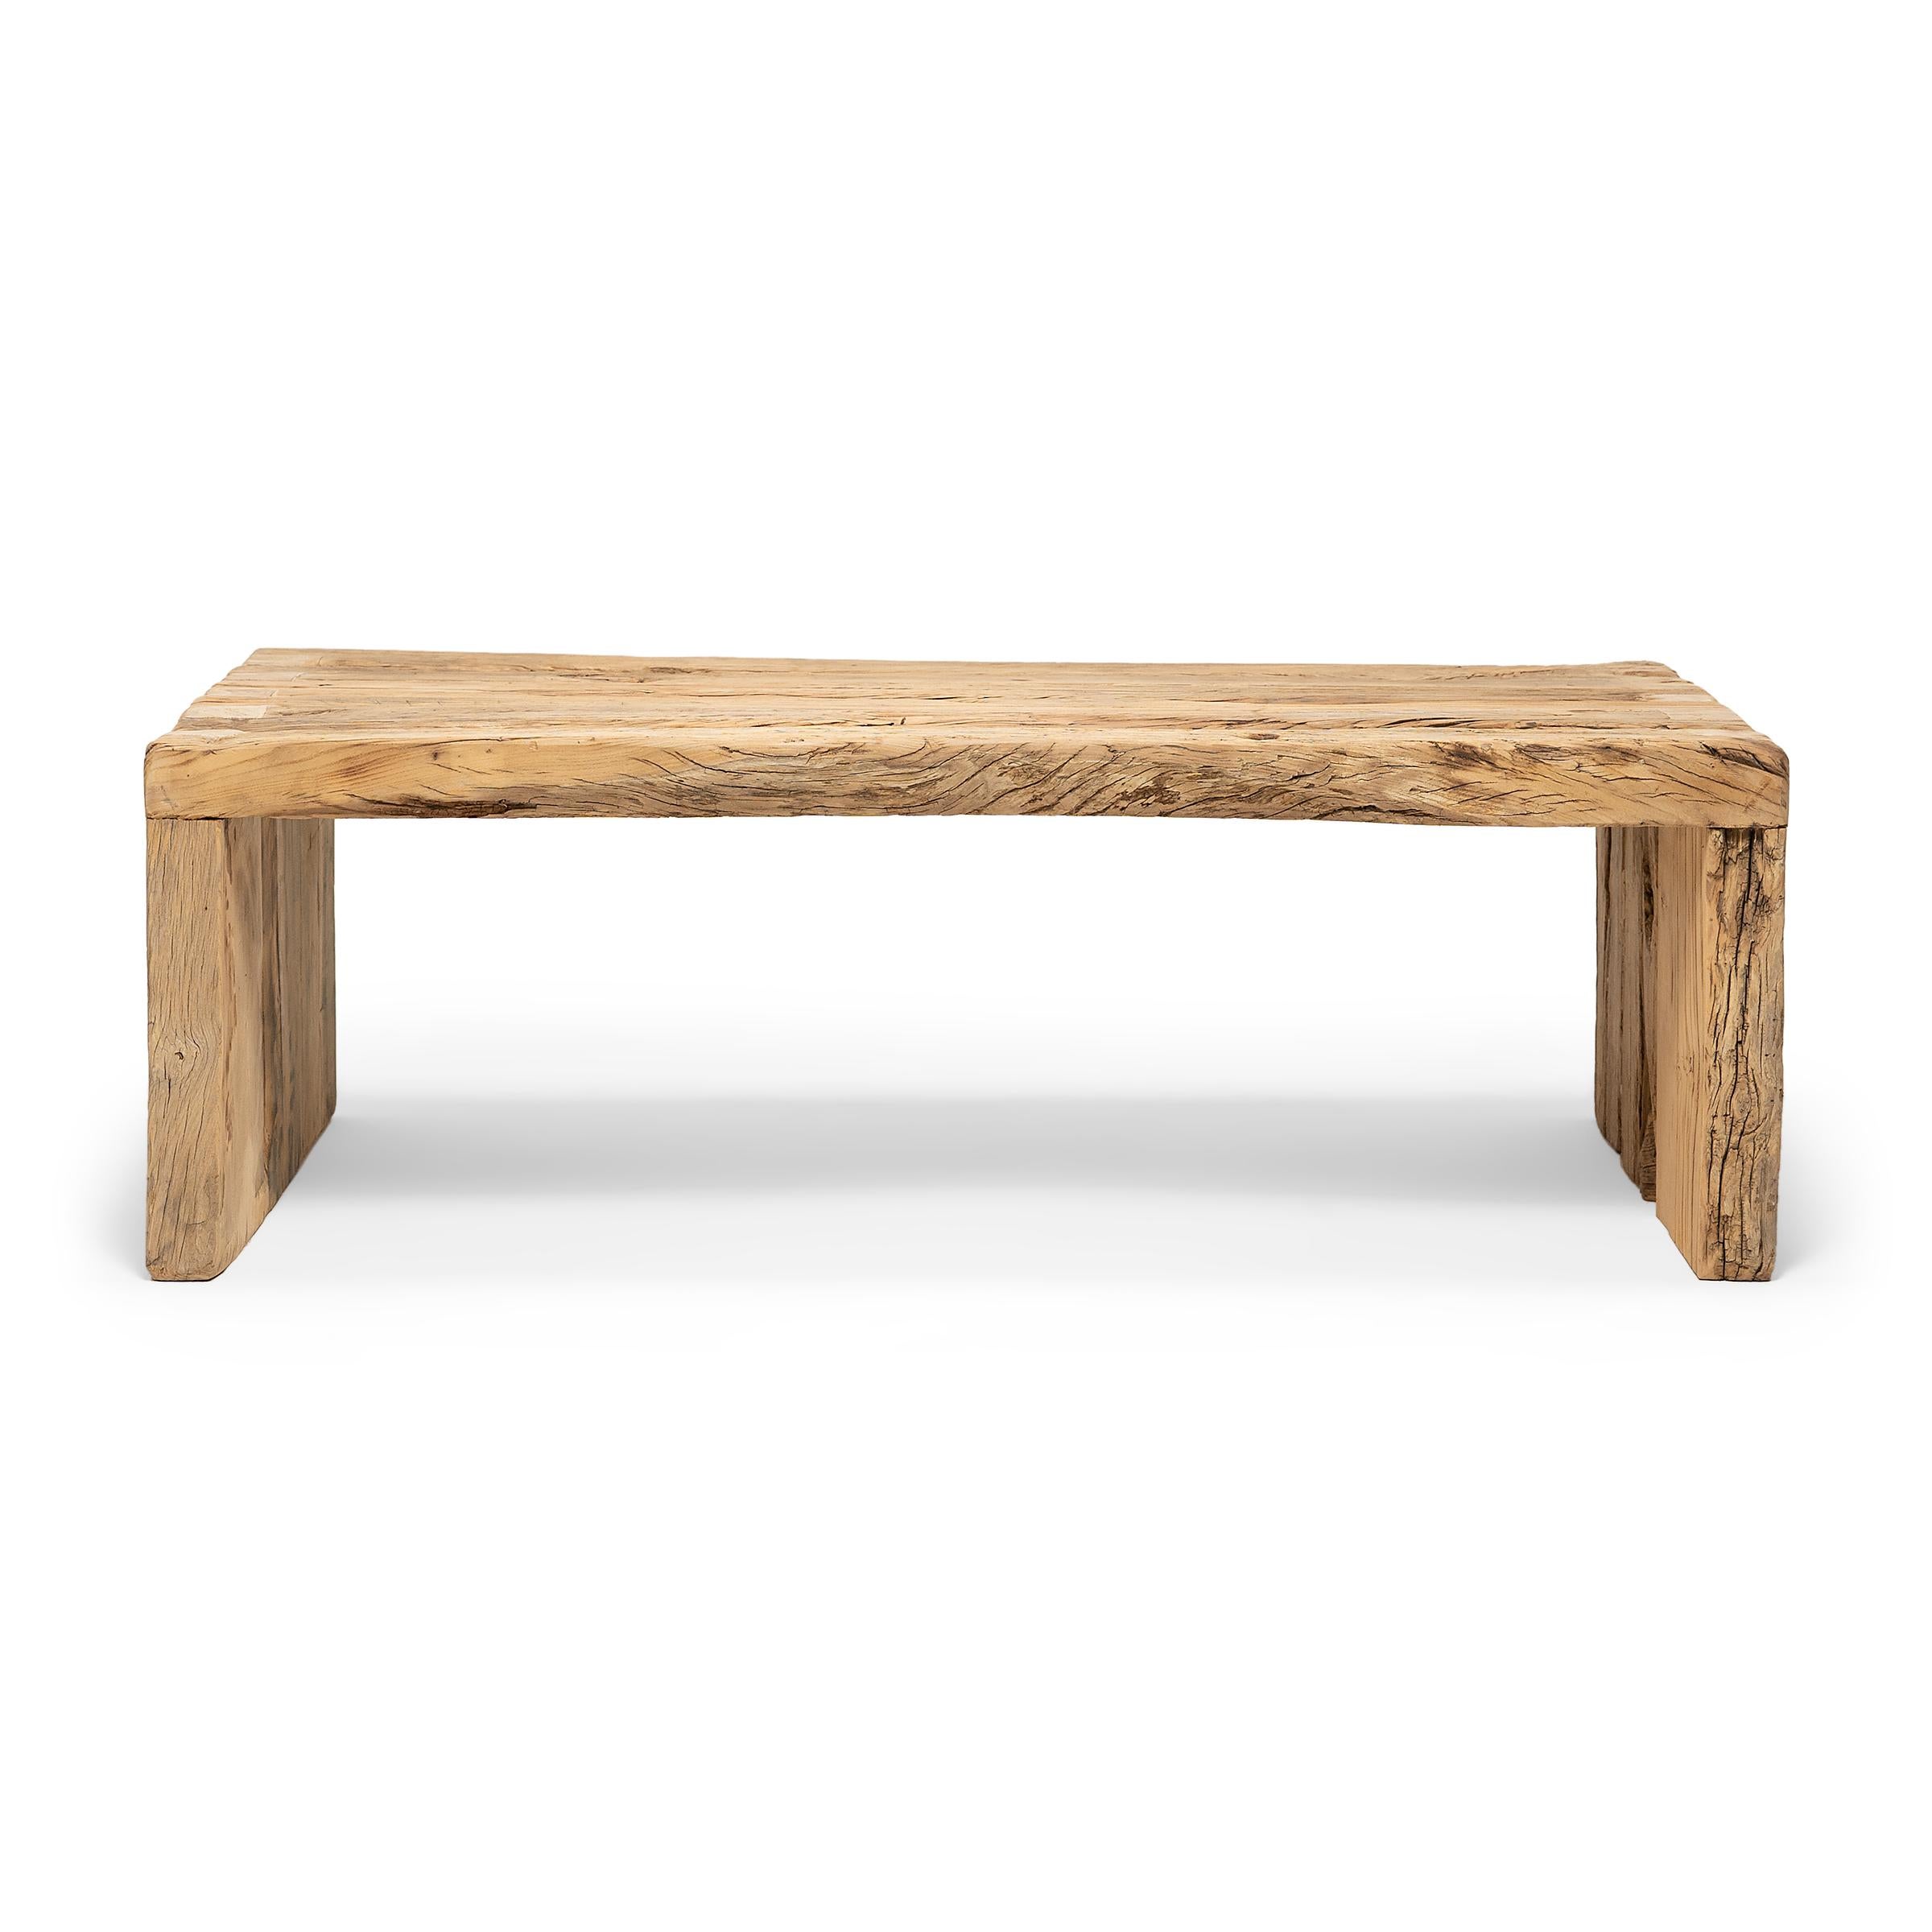 This artisan-crafted coffee table is a celebration of wabi-sabi style. Crafted of thick elmwood timbers reclaimed from Qing-dynasty architecture, the table has a minimalist waterfall design and is left unfinished to preserve the natural beauty of